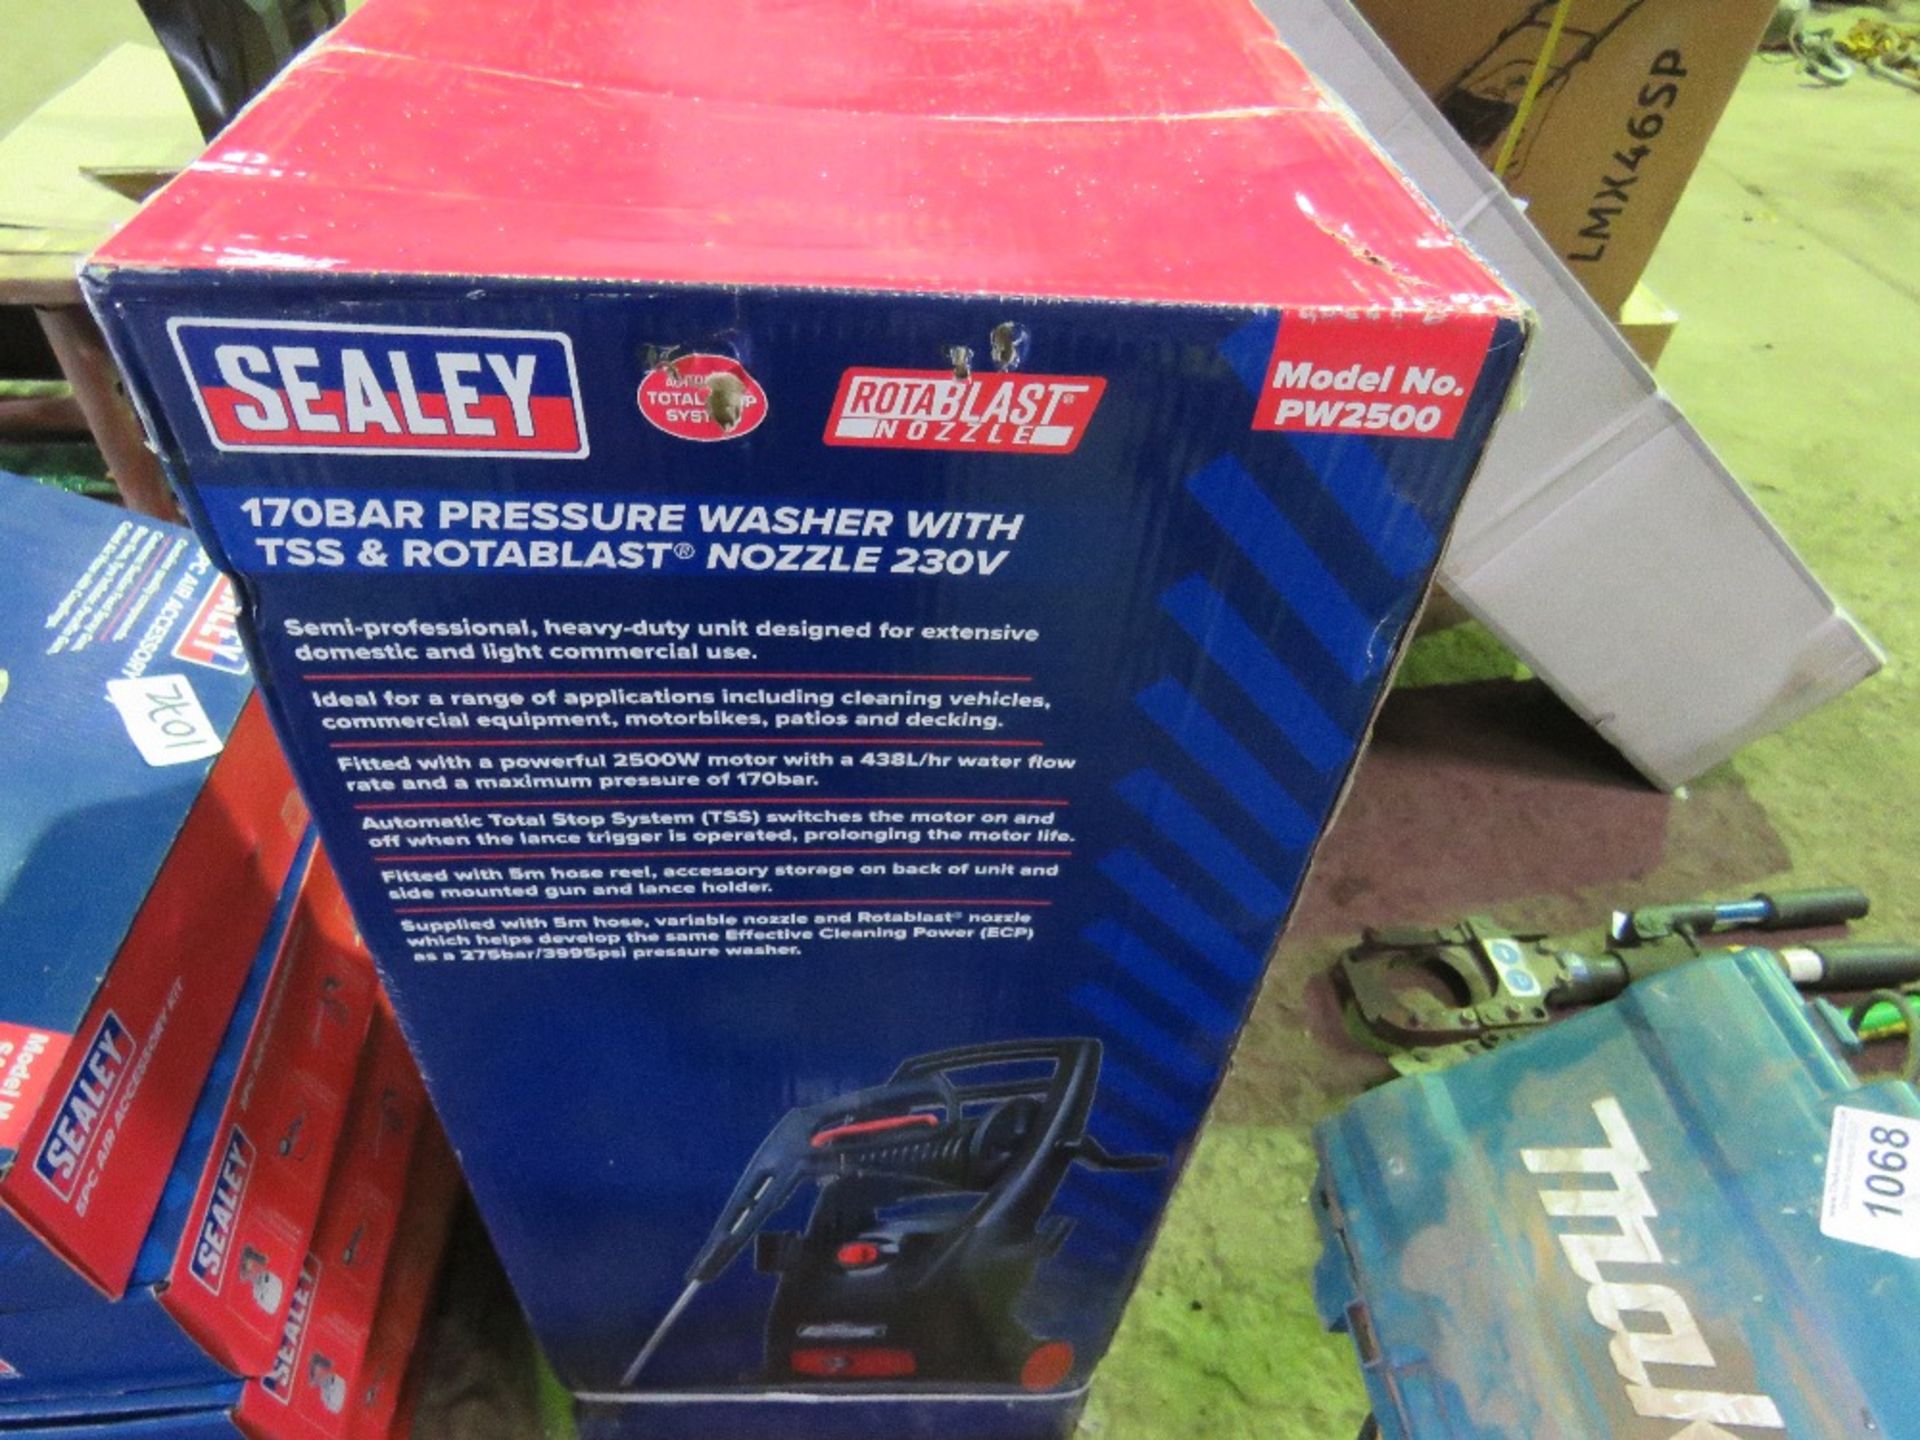 SEALEY 170BAR POWER WASHER SET, 230VOLT POWERED. BOXED, UNUSED, DIRECT FROM LOCAL COMPANY BEING SURP - Image 3 of 4